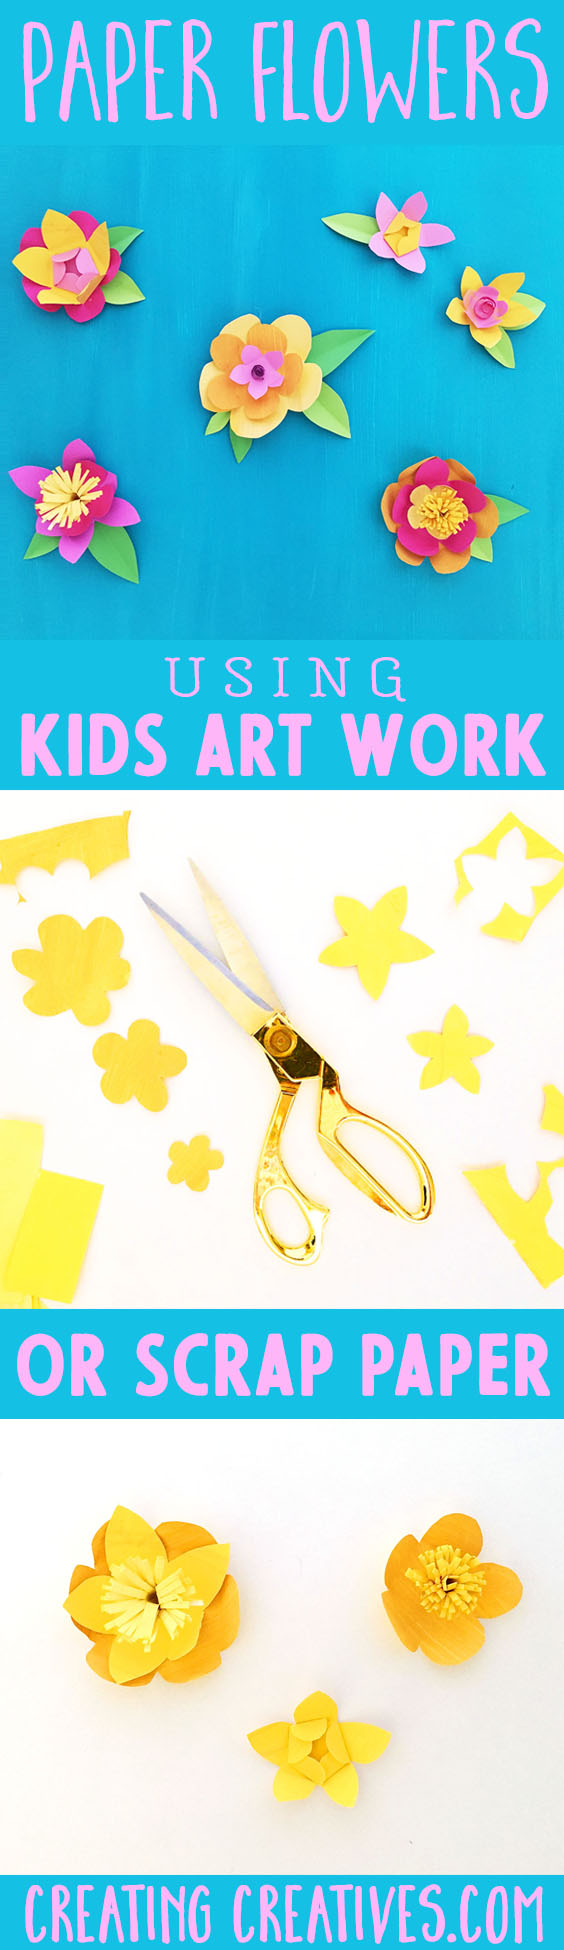 Paper Flowers Using Kids Artwork or Scrap Paper | Recycled Crafts for Kids